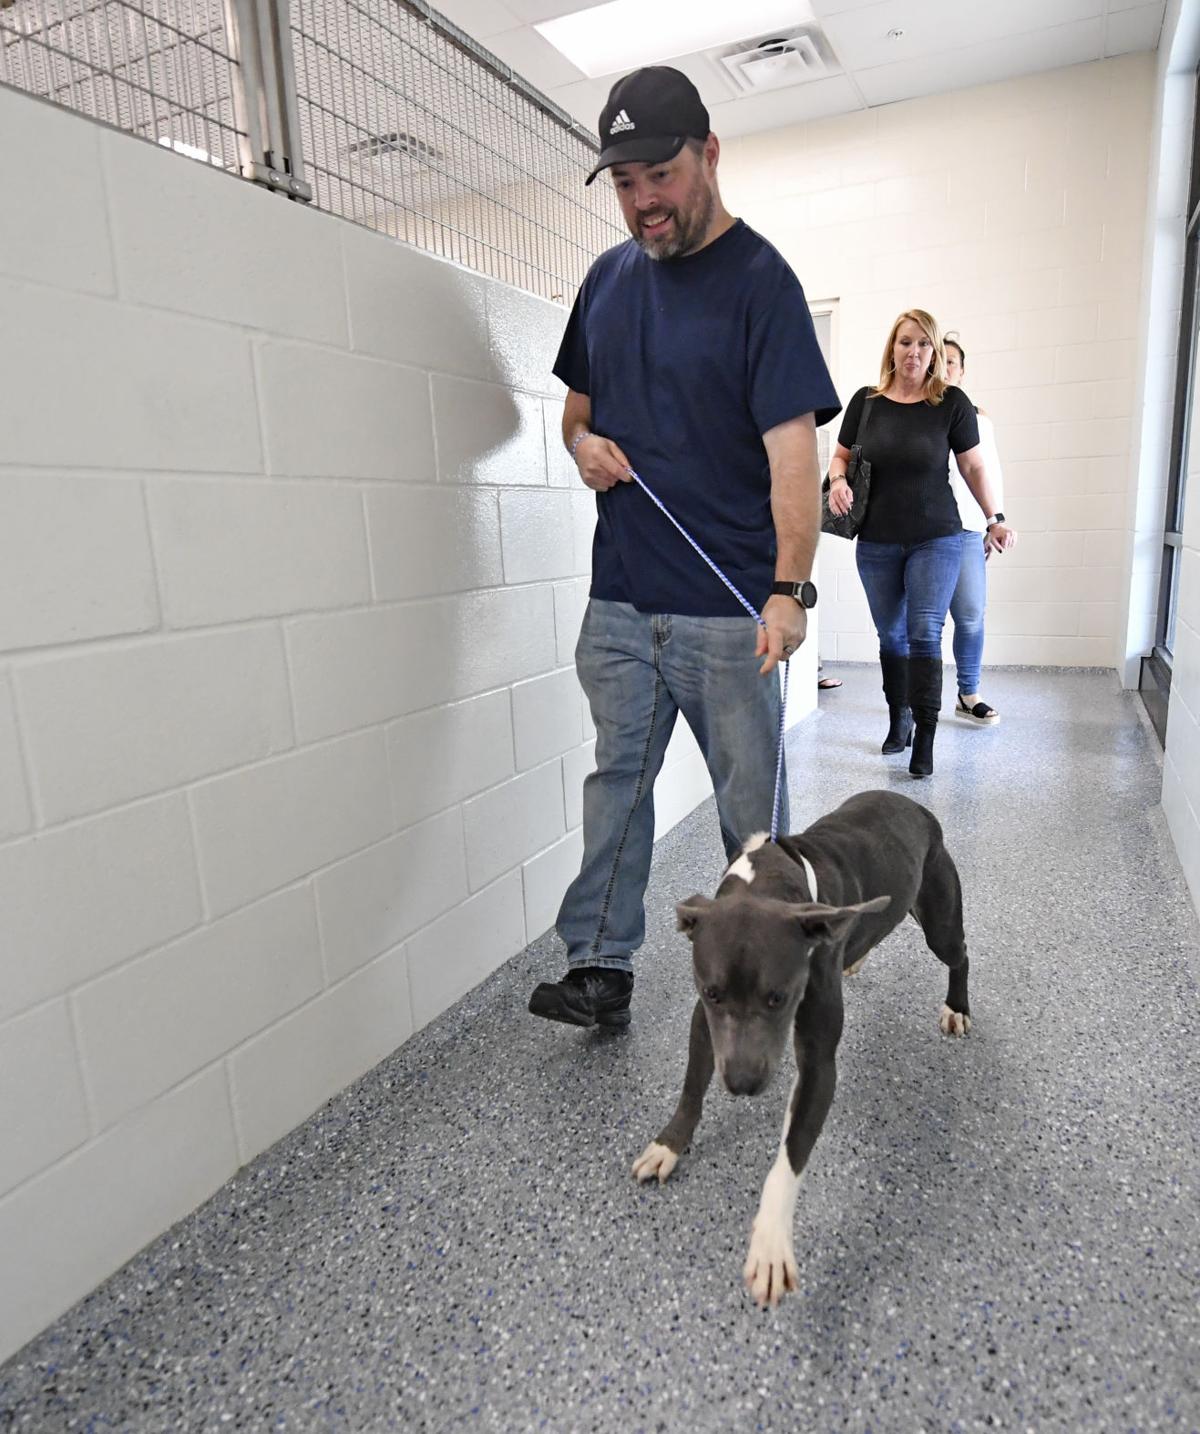 This Baton Rouge 'socially conscious' animal shelter